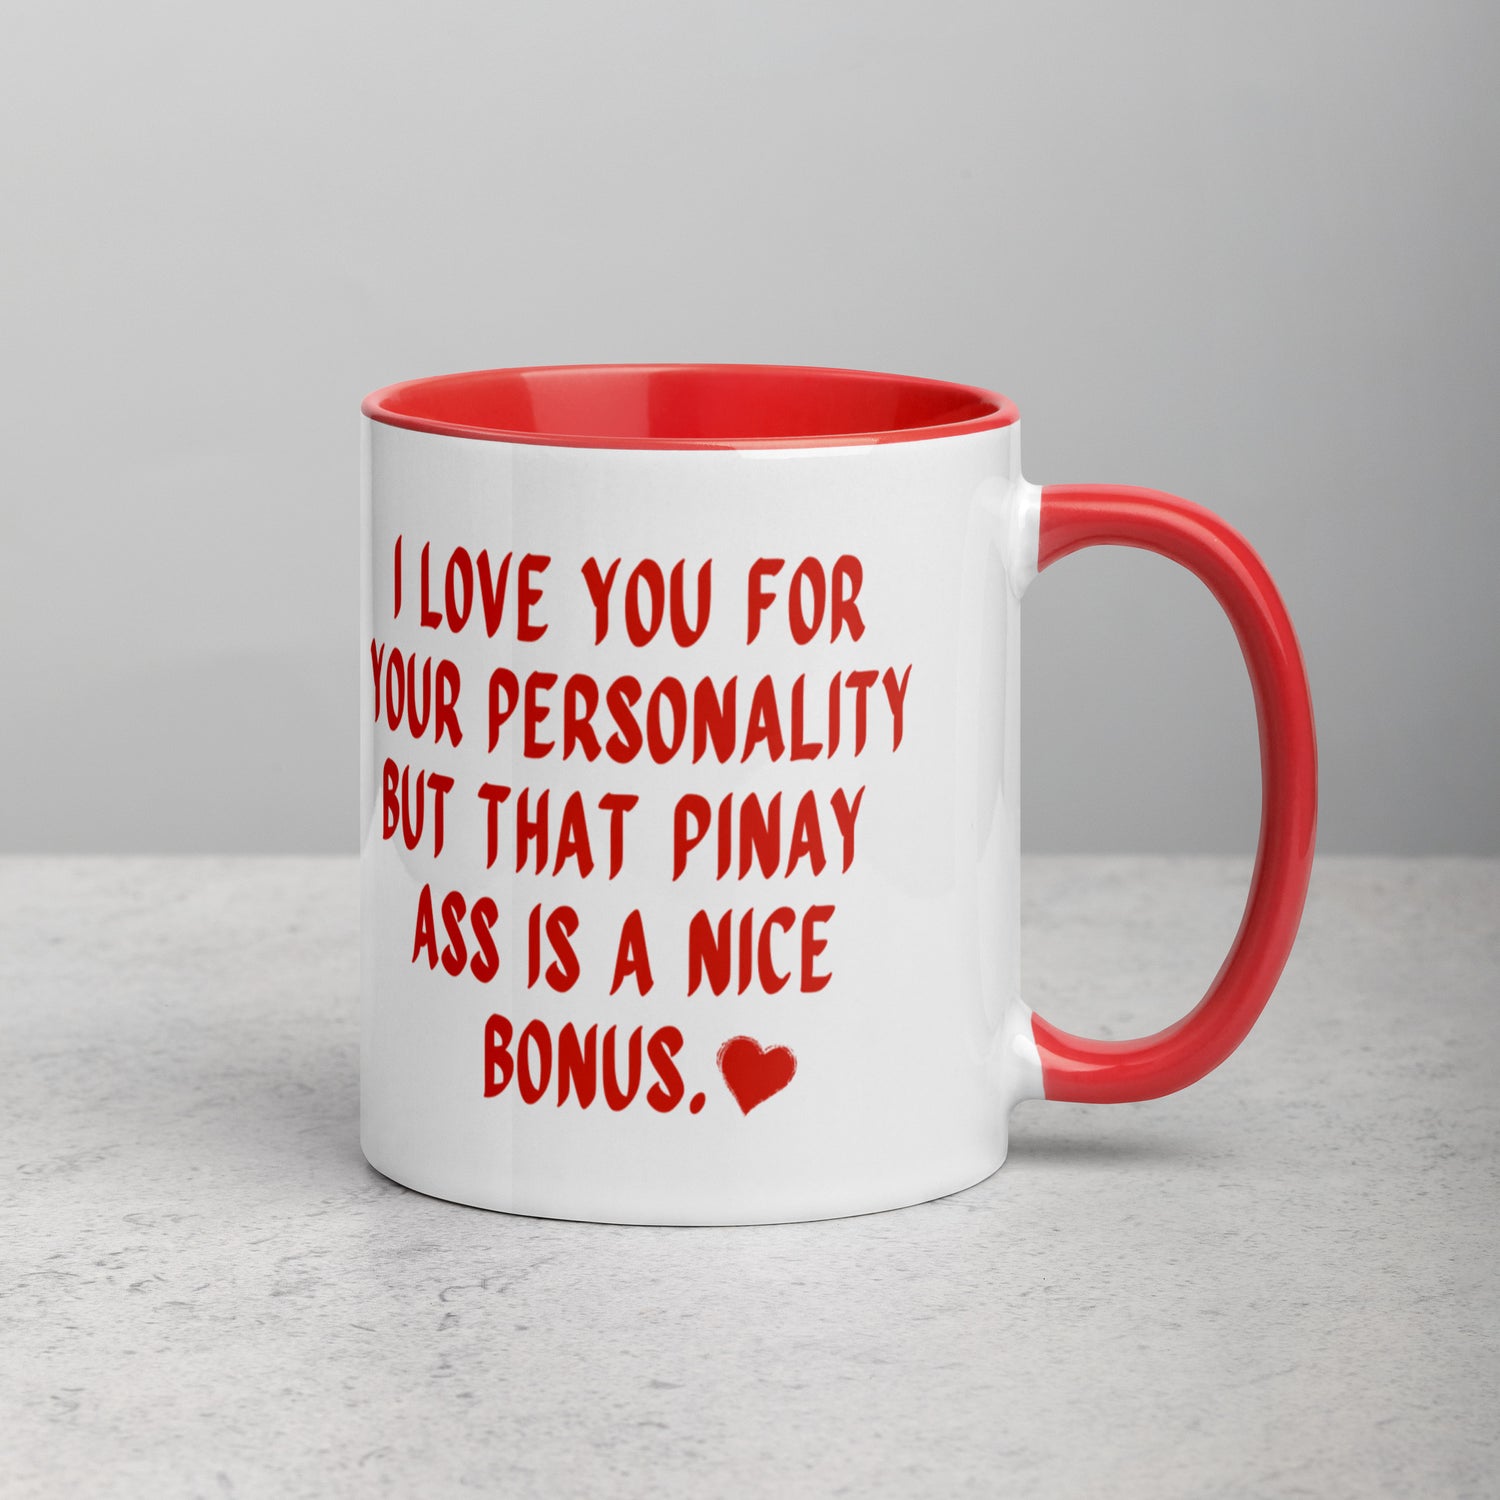 I Love You For Your Personality Funny Pinay Valentine's Day Mug in color variant Red.